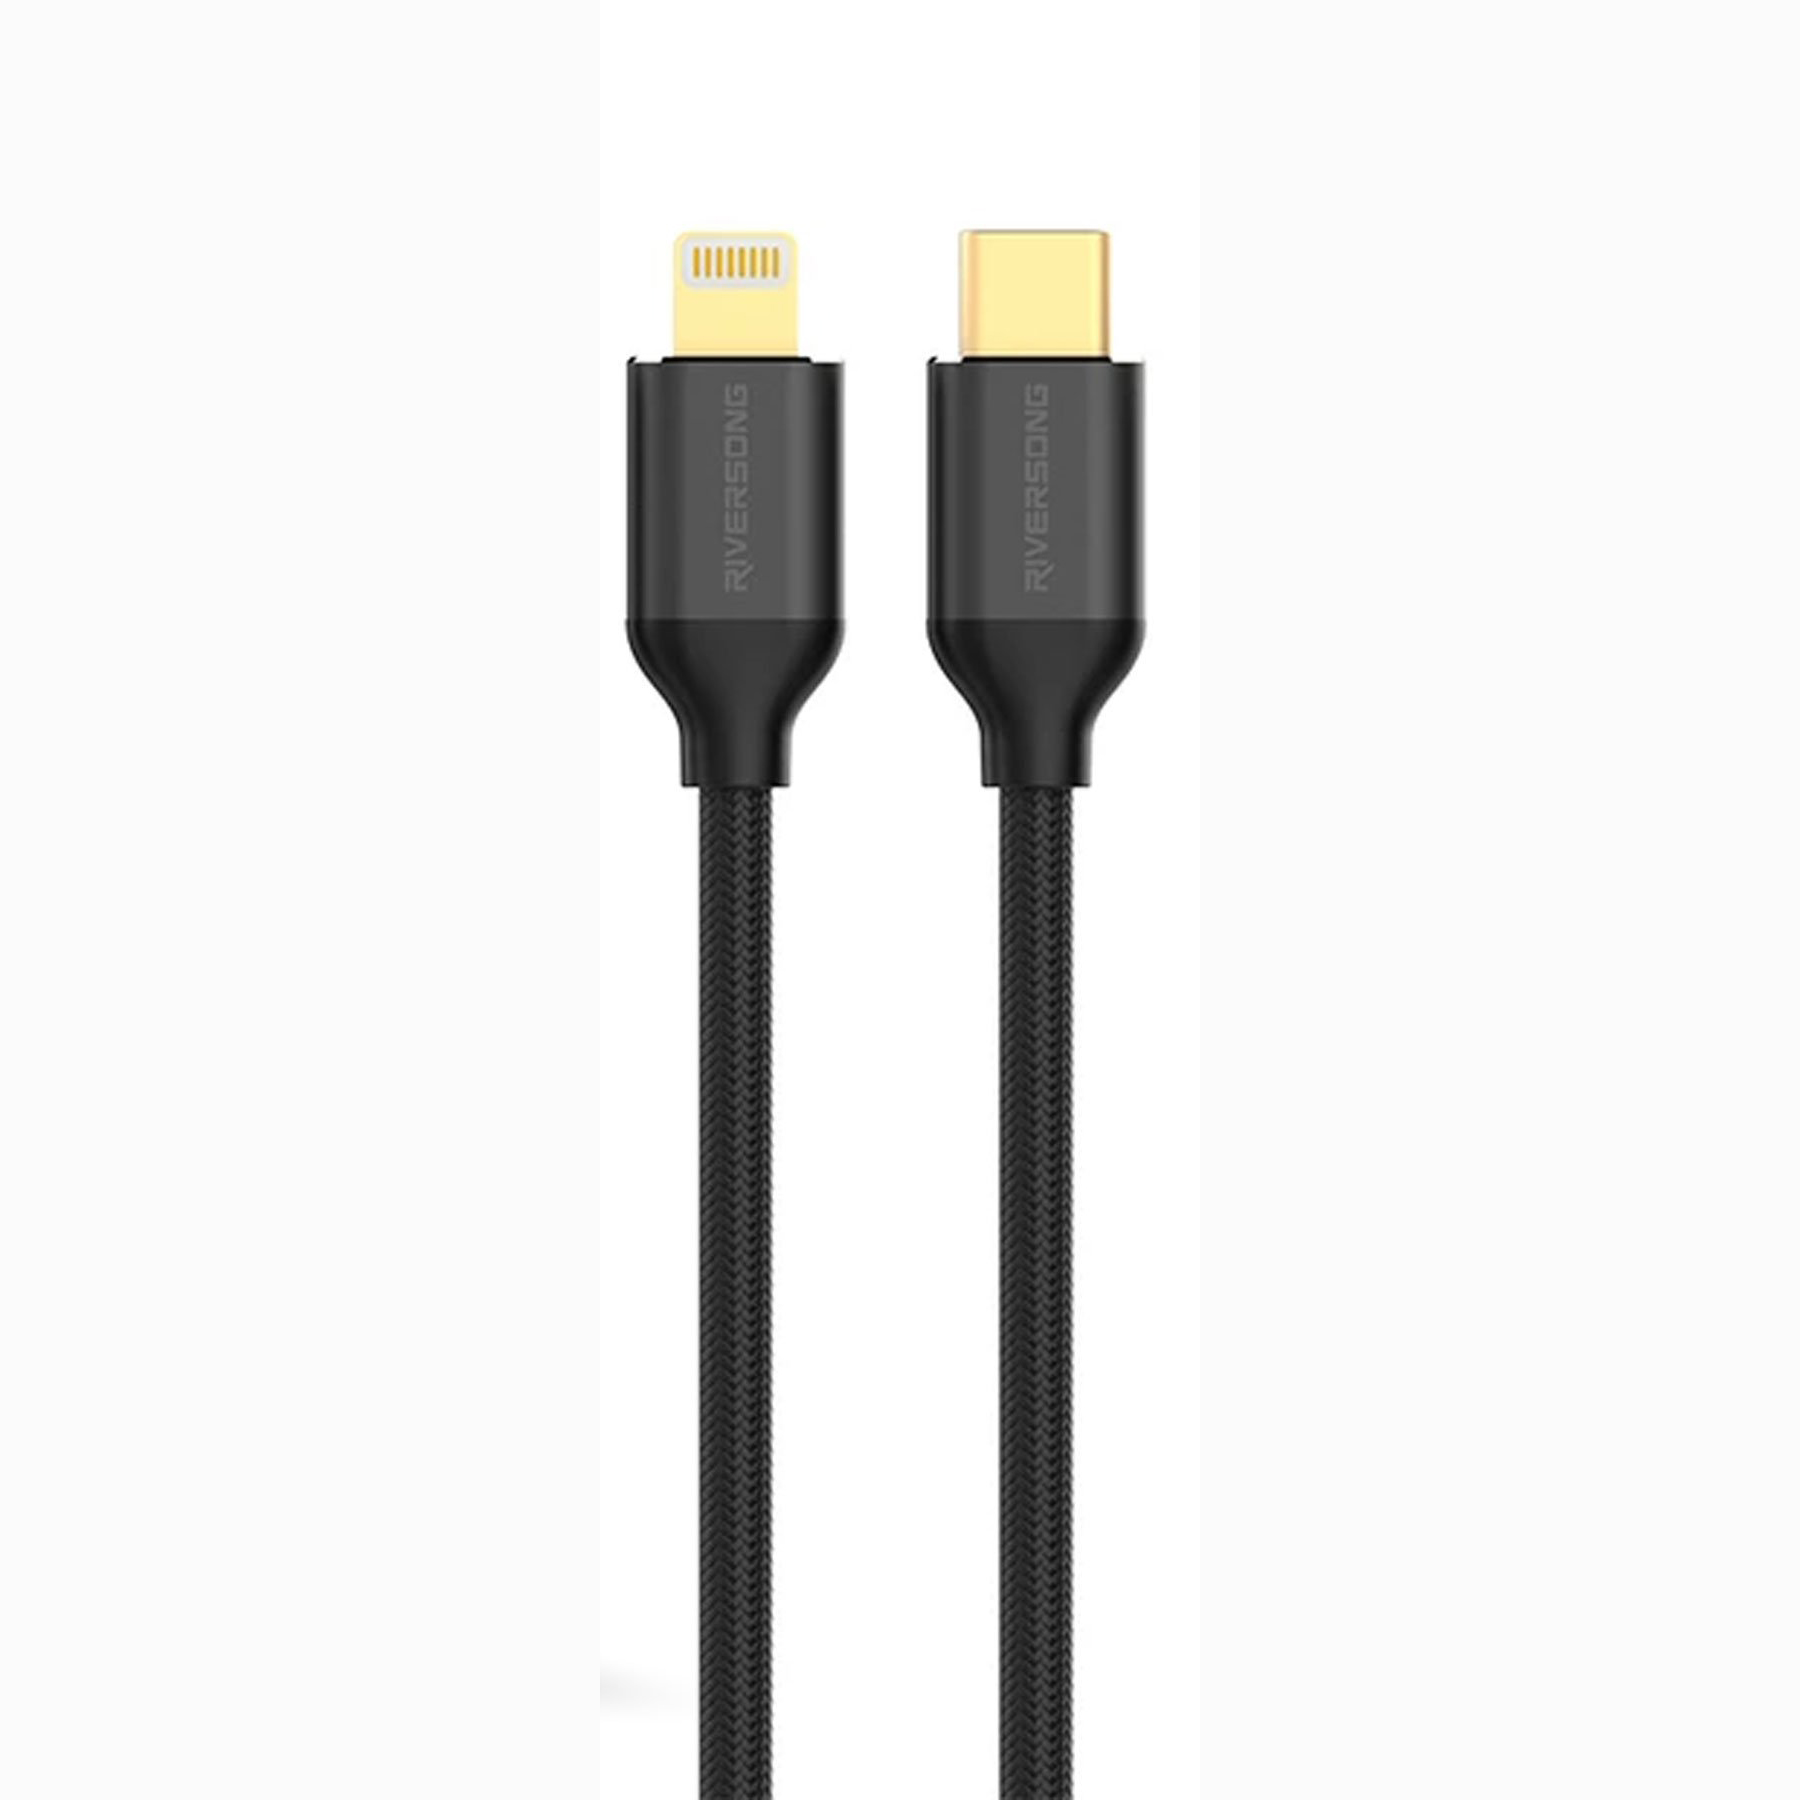 CABLE Lightning TO TYPE-C FOR IPHONE & IPAD DATA & CHARGE RIVERSONG 2.4A CL47 تايب سي الى ايفون ,Other Smartphone Acc